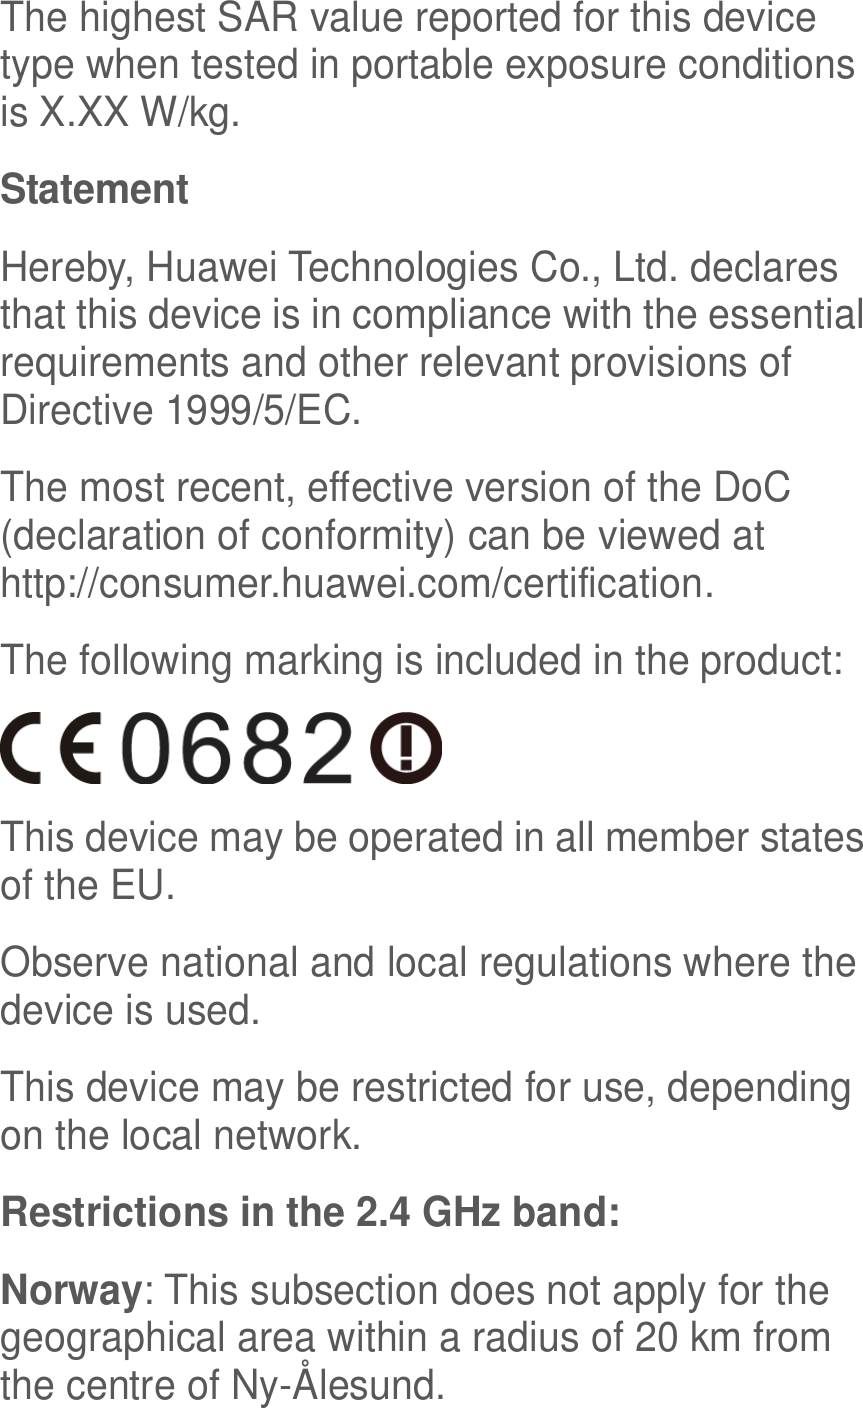  The highest SAR value reported for this device type when tested in portable exposure conditions is X.XX W/kg. Statement Hereby, Huawei Technologies Co., Ltd. declares that this device is in compliance with the essential requirements and other relevant provisions of Directive 1999/5/EC. The most recent, effective version of the DoC (declaration of conformity) can be viewed at http://consumer.huawei.com/certification. The following marking is included in the product:  This device may be operated in all member states of the EU. Observe national and local regulations where the device is used. This device may be restricted for use, depending on the local network. Restrictions in the 2.4 GHz band: Norway: This subsection does not apply for the geographical area within a radius of 20 km from the centre of Ny-Ålesund. 